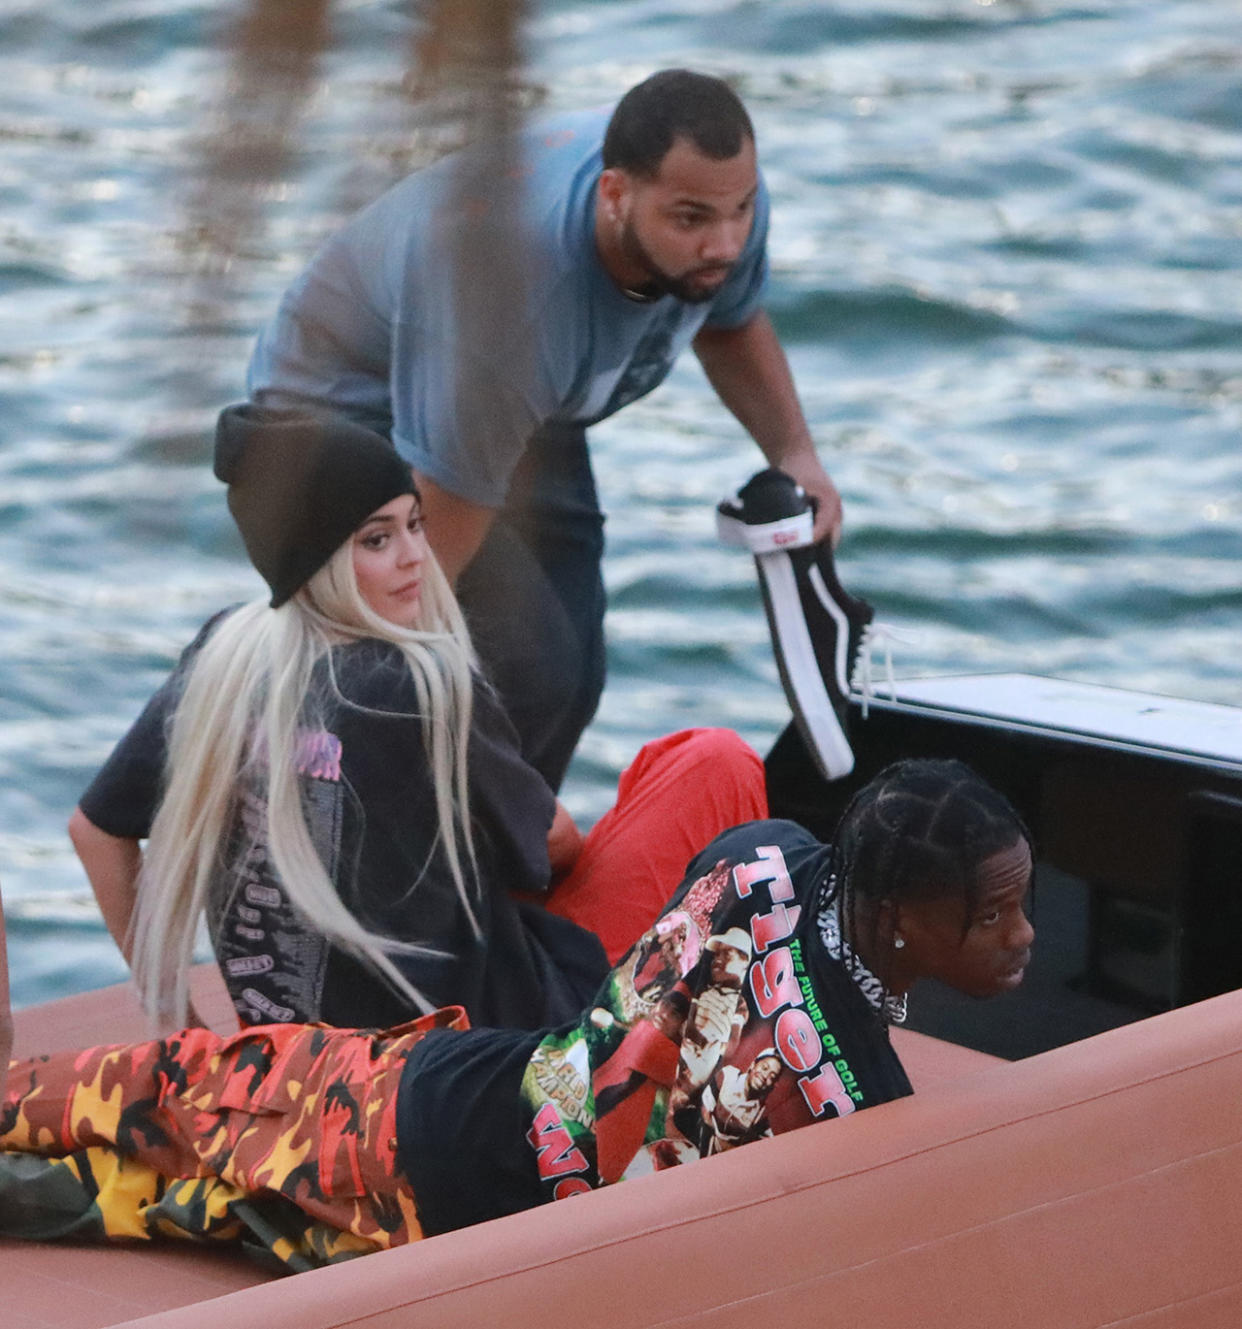 EXCLUSIVE: Kylie Jenner goes back to being a blonde (like she was with X-Boyfriend Tyga) seen here are the first pictures of a very "BLONDE" Kylie Jenner and her new boyfriend Jacques Webster, Jr. better know as hip-hop singer Travis Scott. The lovebirds arrived by yacht and dined in a private back room of the exclusive restaurant the River Yacht Club where Kylie and Travis looked very happy and were spotted kissing and being very romantic while bodyguards kept out unwanted people. The new couple had a blast at the exclusive waterside restaurant where they were joined by Miami-based restaurant, nightlife and hospitality entrepreneur David Grutman and his wife Isabela Rangel. While Kylie drank Evian water all night her new man Rapper Travis Scott was in full party mode and did a total of 17 shots of Don Julio 1942â„¢- World's First Luxury Tequilaâ€Ž with their friends. Perhaps the Tequila took its toll, as Travis looked a little under the weather on the boat ride home. The couple spent a total of $2000.00 with their friends and left a very generous additional $100.00 in addition to the 20% tip at The River Yacht Club Restaurant in Miami on May 7, 2017 in Miami, Florida. 07 May 2017 Pictured: Kylie Jenner, Travis-Scott. Photo credit: TBA / MEGA TheMegaAgency.com +1 888 505 6342 (Mega Agency TagID: MEGA34150_011.jpg) [Photo via Mega Agency]